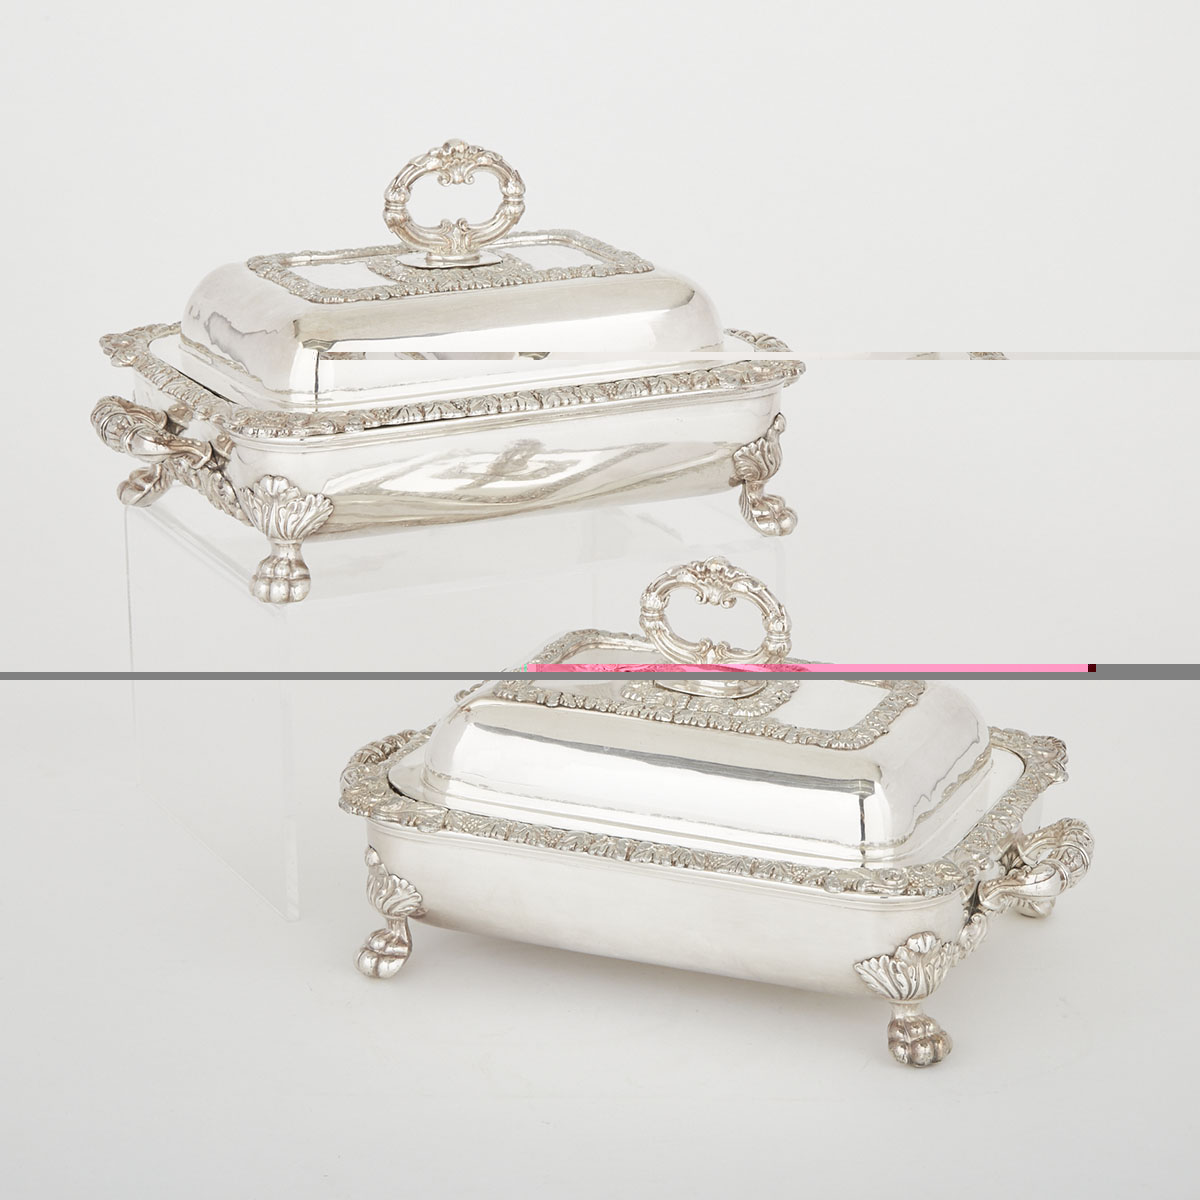 Pair of Old Sheffield Plate Rectangular Covered Entrée Dishes with Warming Stands, c.1825